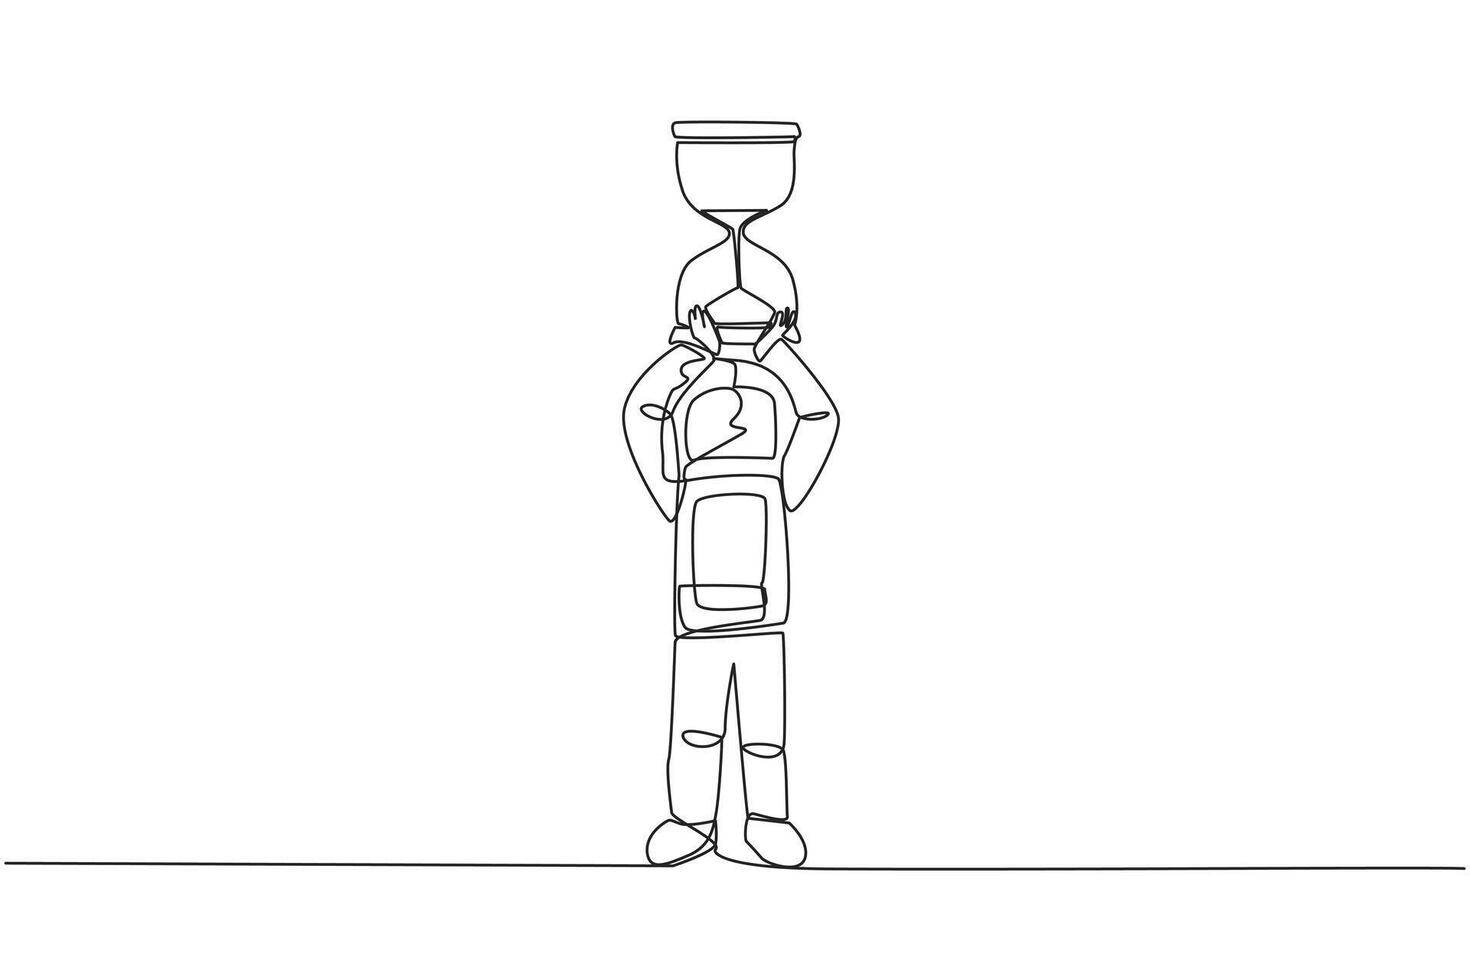 Single continuous line drawing young energetic astronaut lift up big hourglass above head. A tool used to countdown departures into outer space. Cosmic deep space. One line design vector illustration